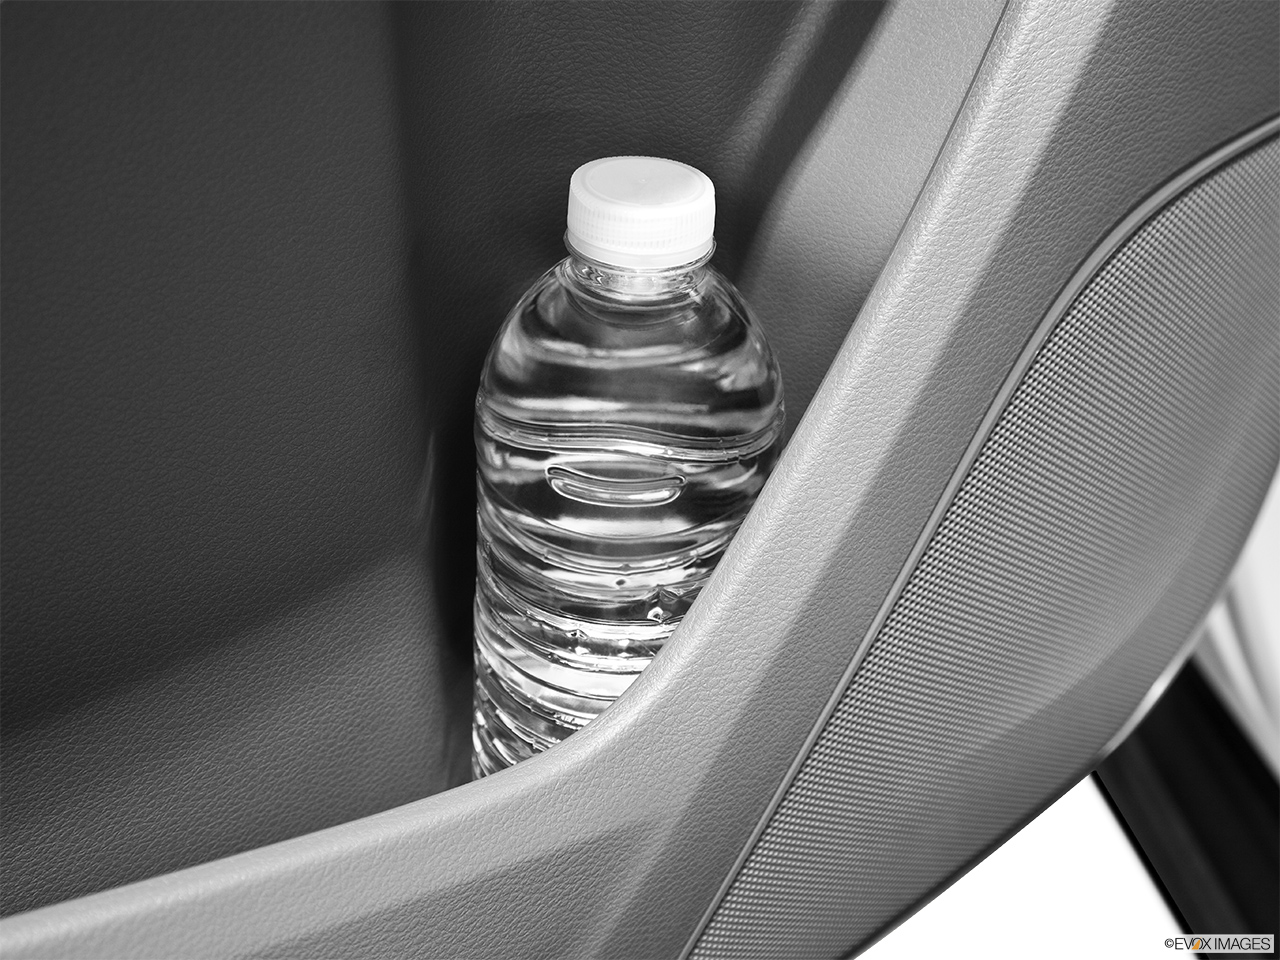 2014 Acura MDX SH-AWD Second row side cup holder with coffee prop, or second row door cup holder with water bottle. 